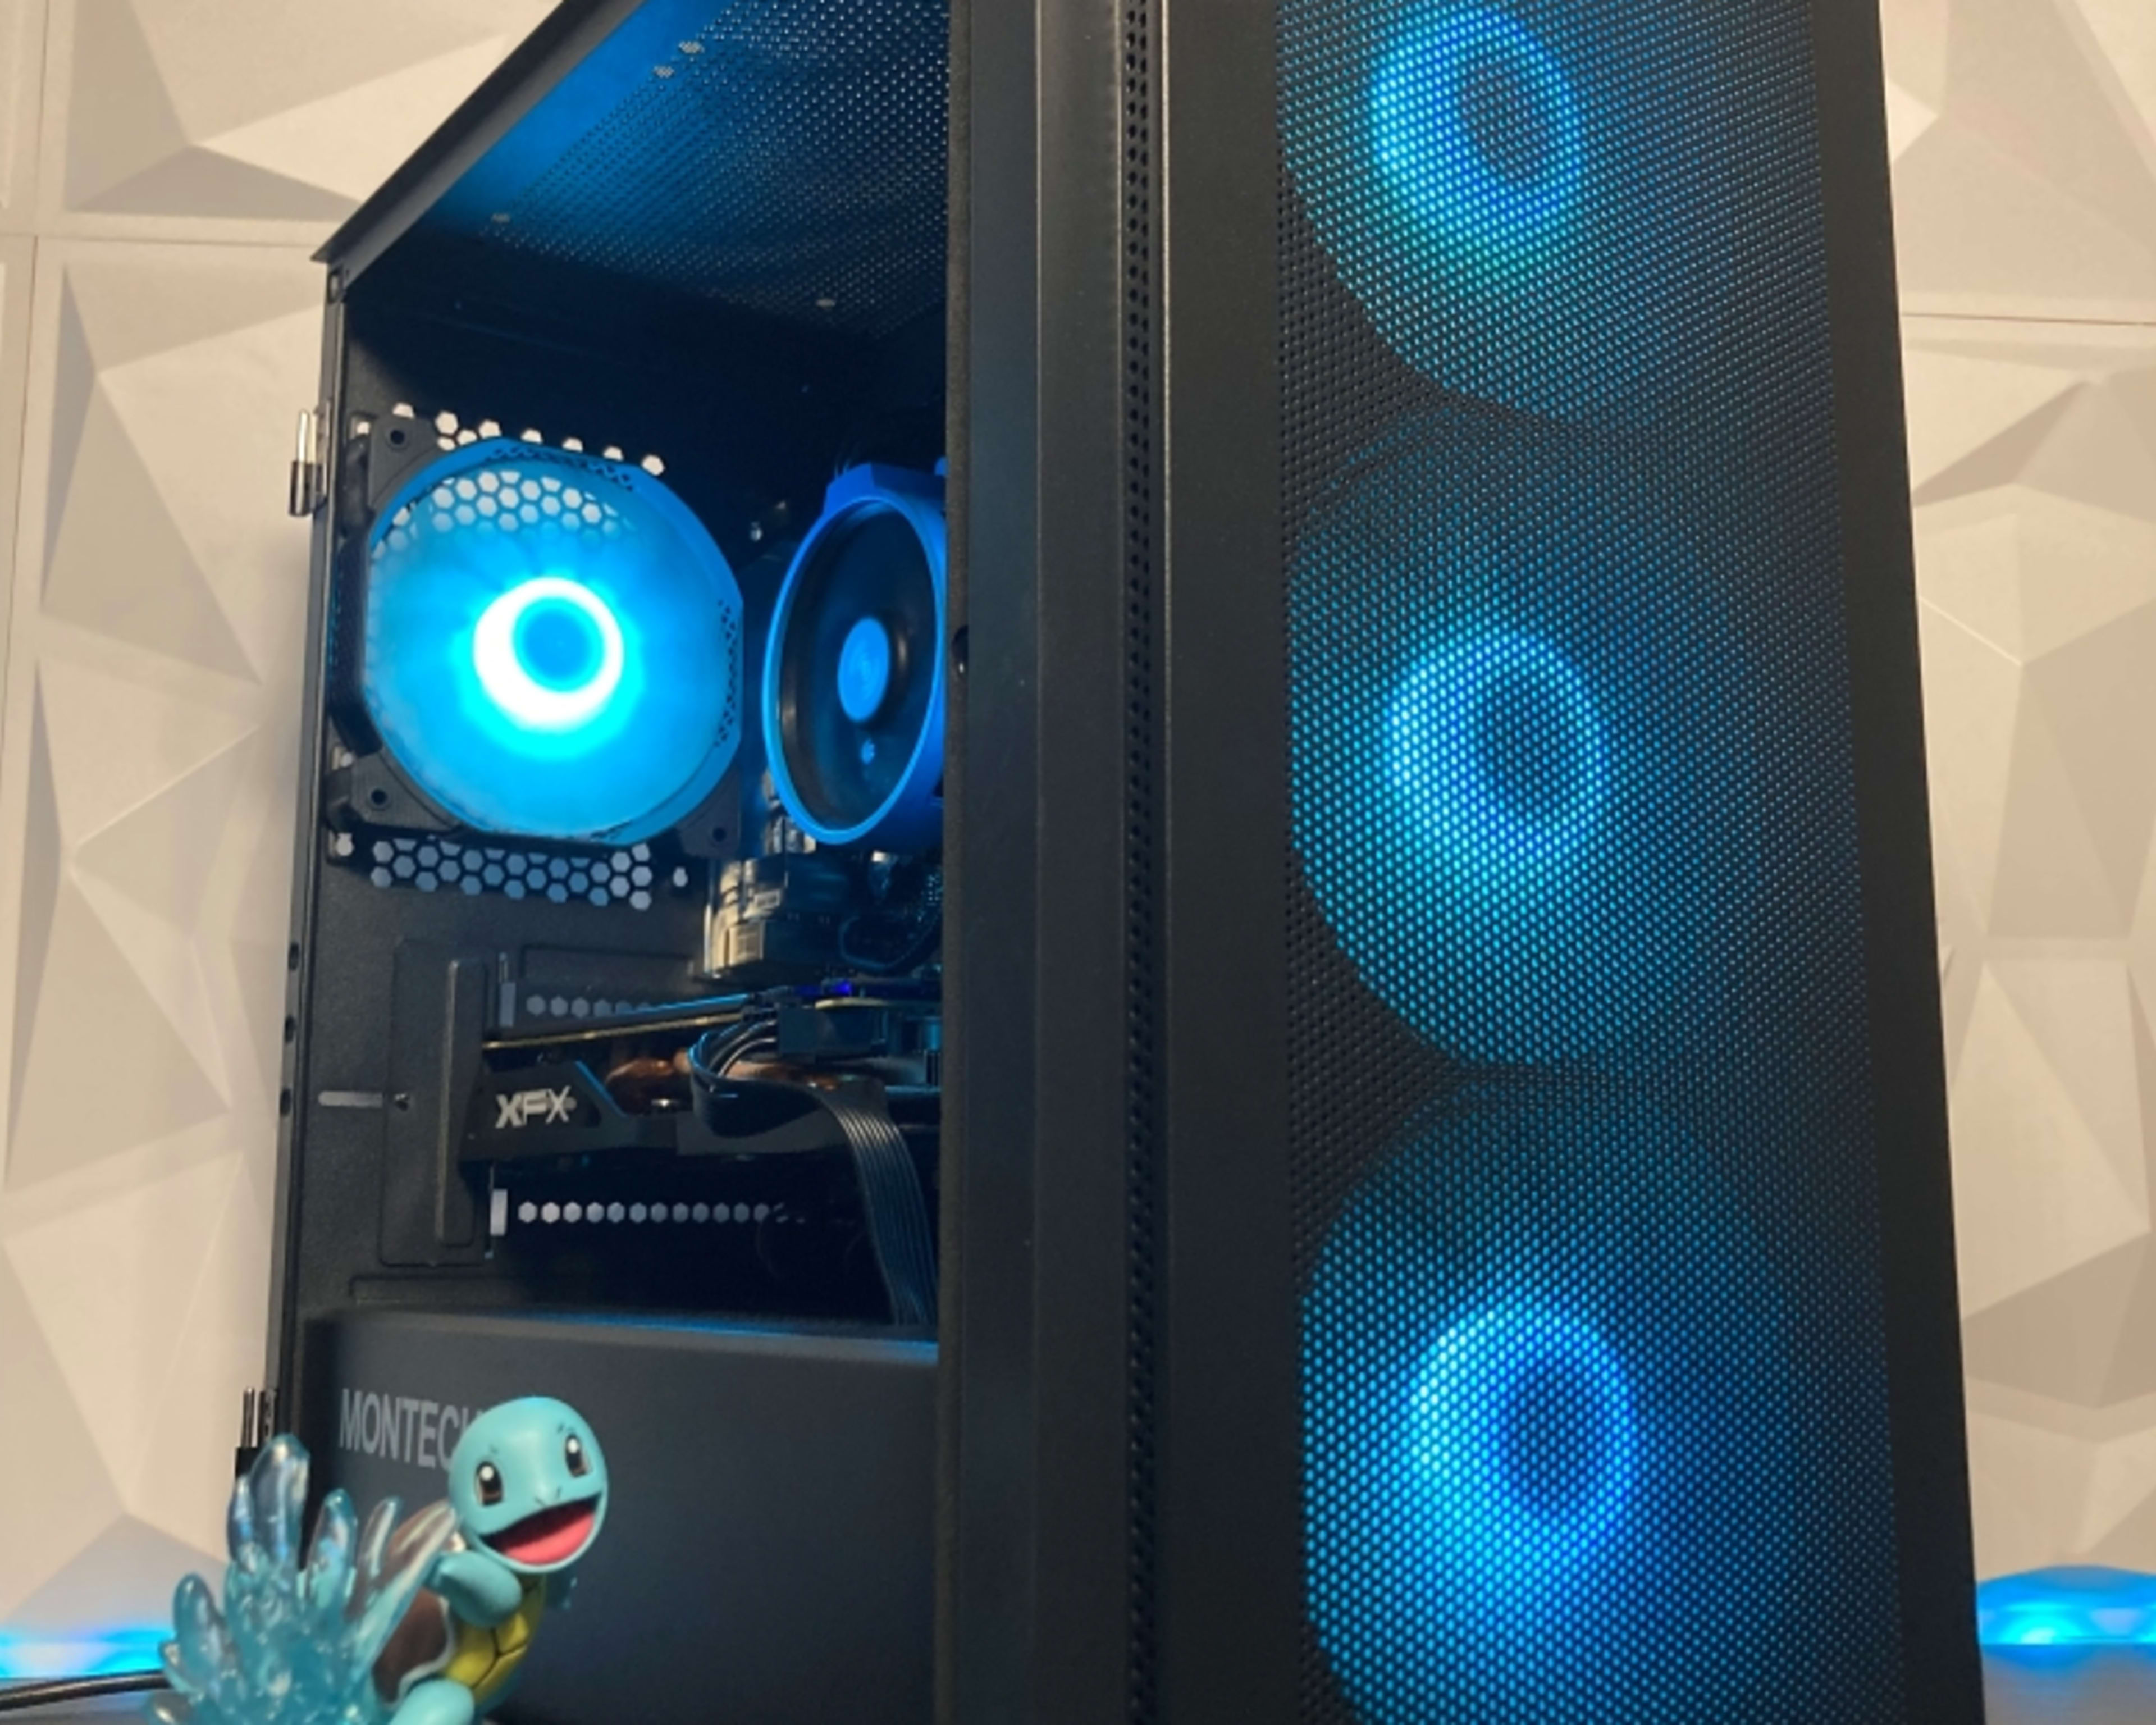 💦 Squirtle💦 | R3 2200G | RX 570 XFX | Budget Gaming PC